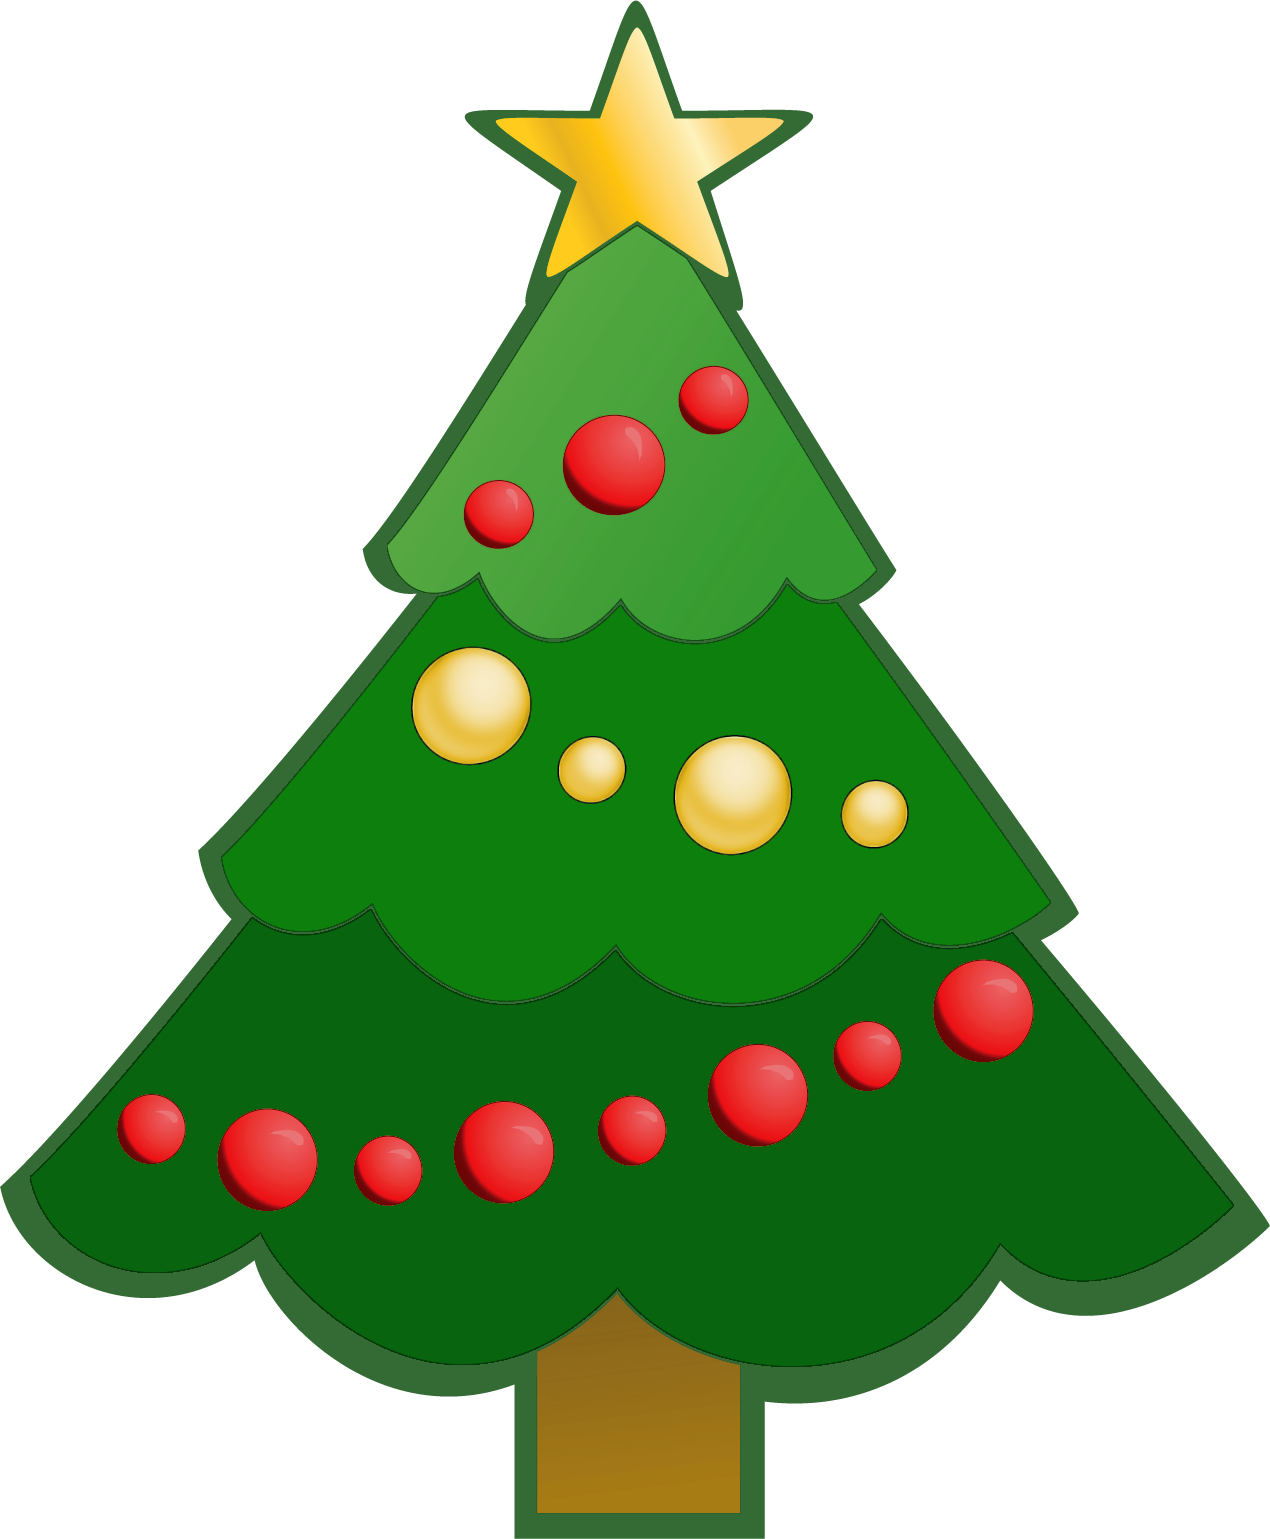 Tree Simple Clipart - ClipArt Best